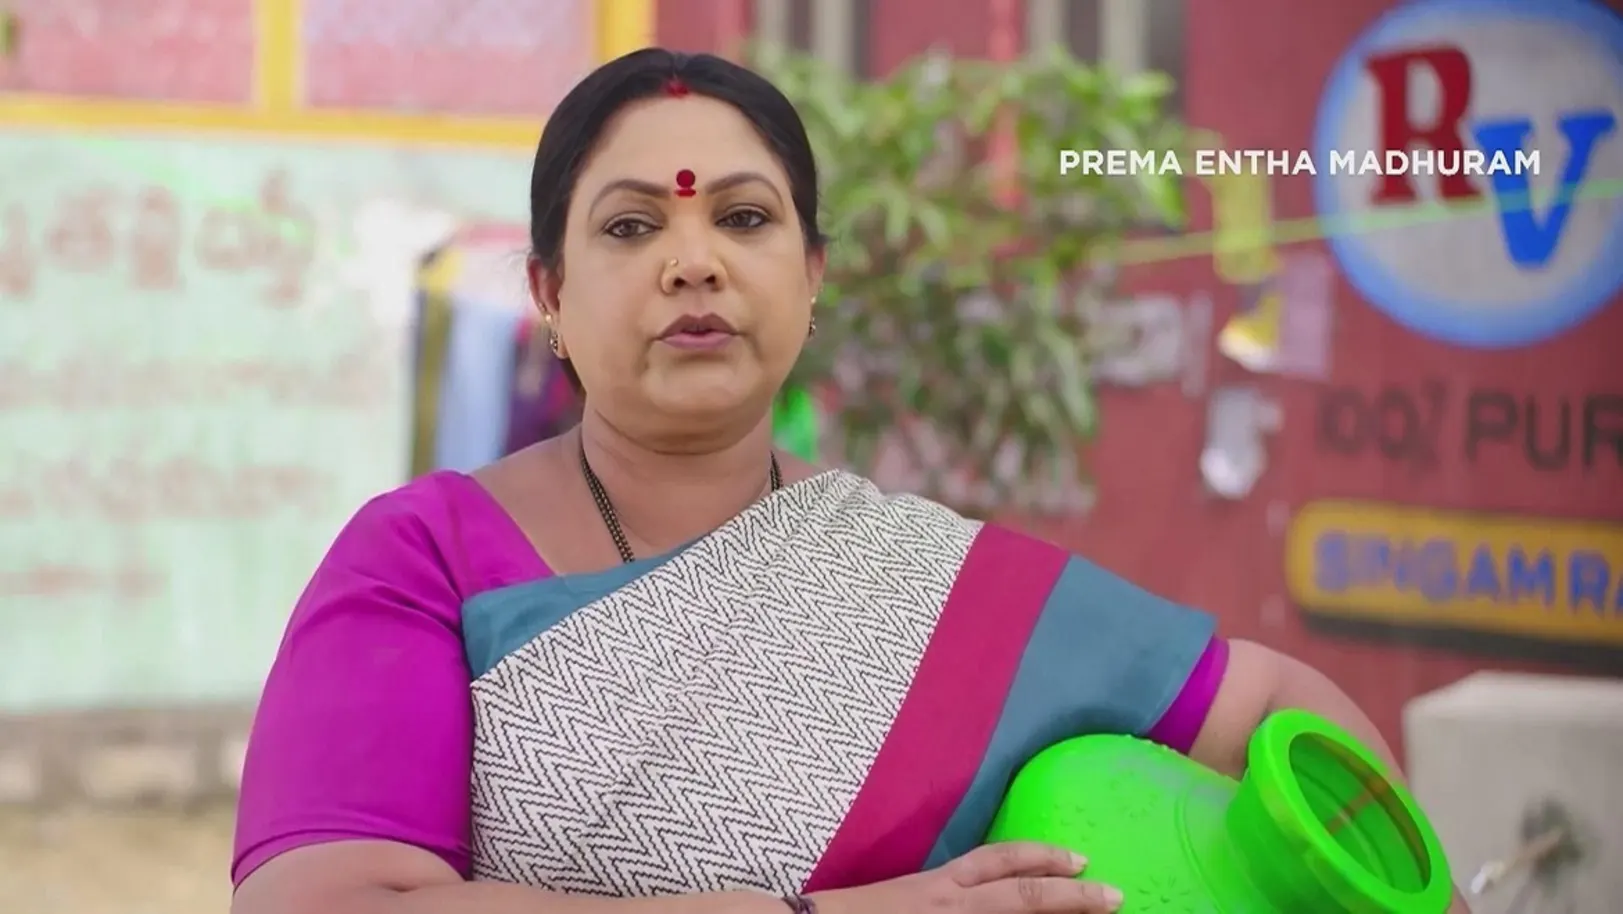 Padma Wishes the Best for Her Family | Prema Entha Maduram 